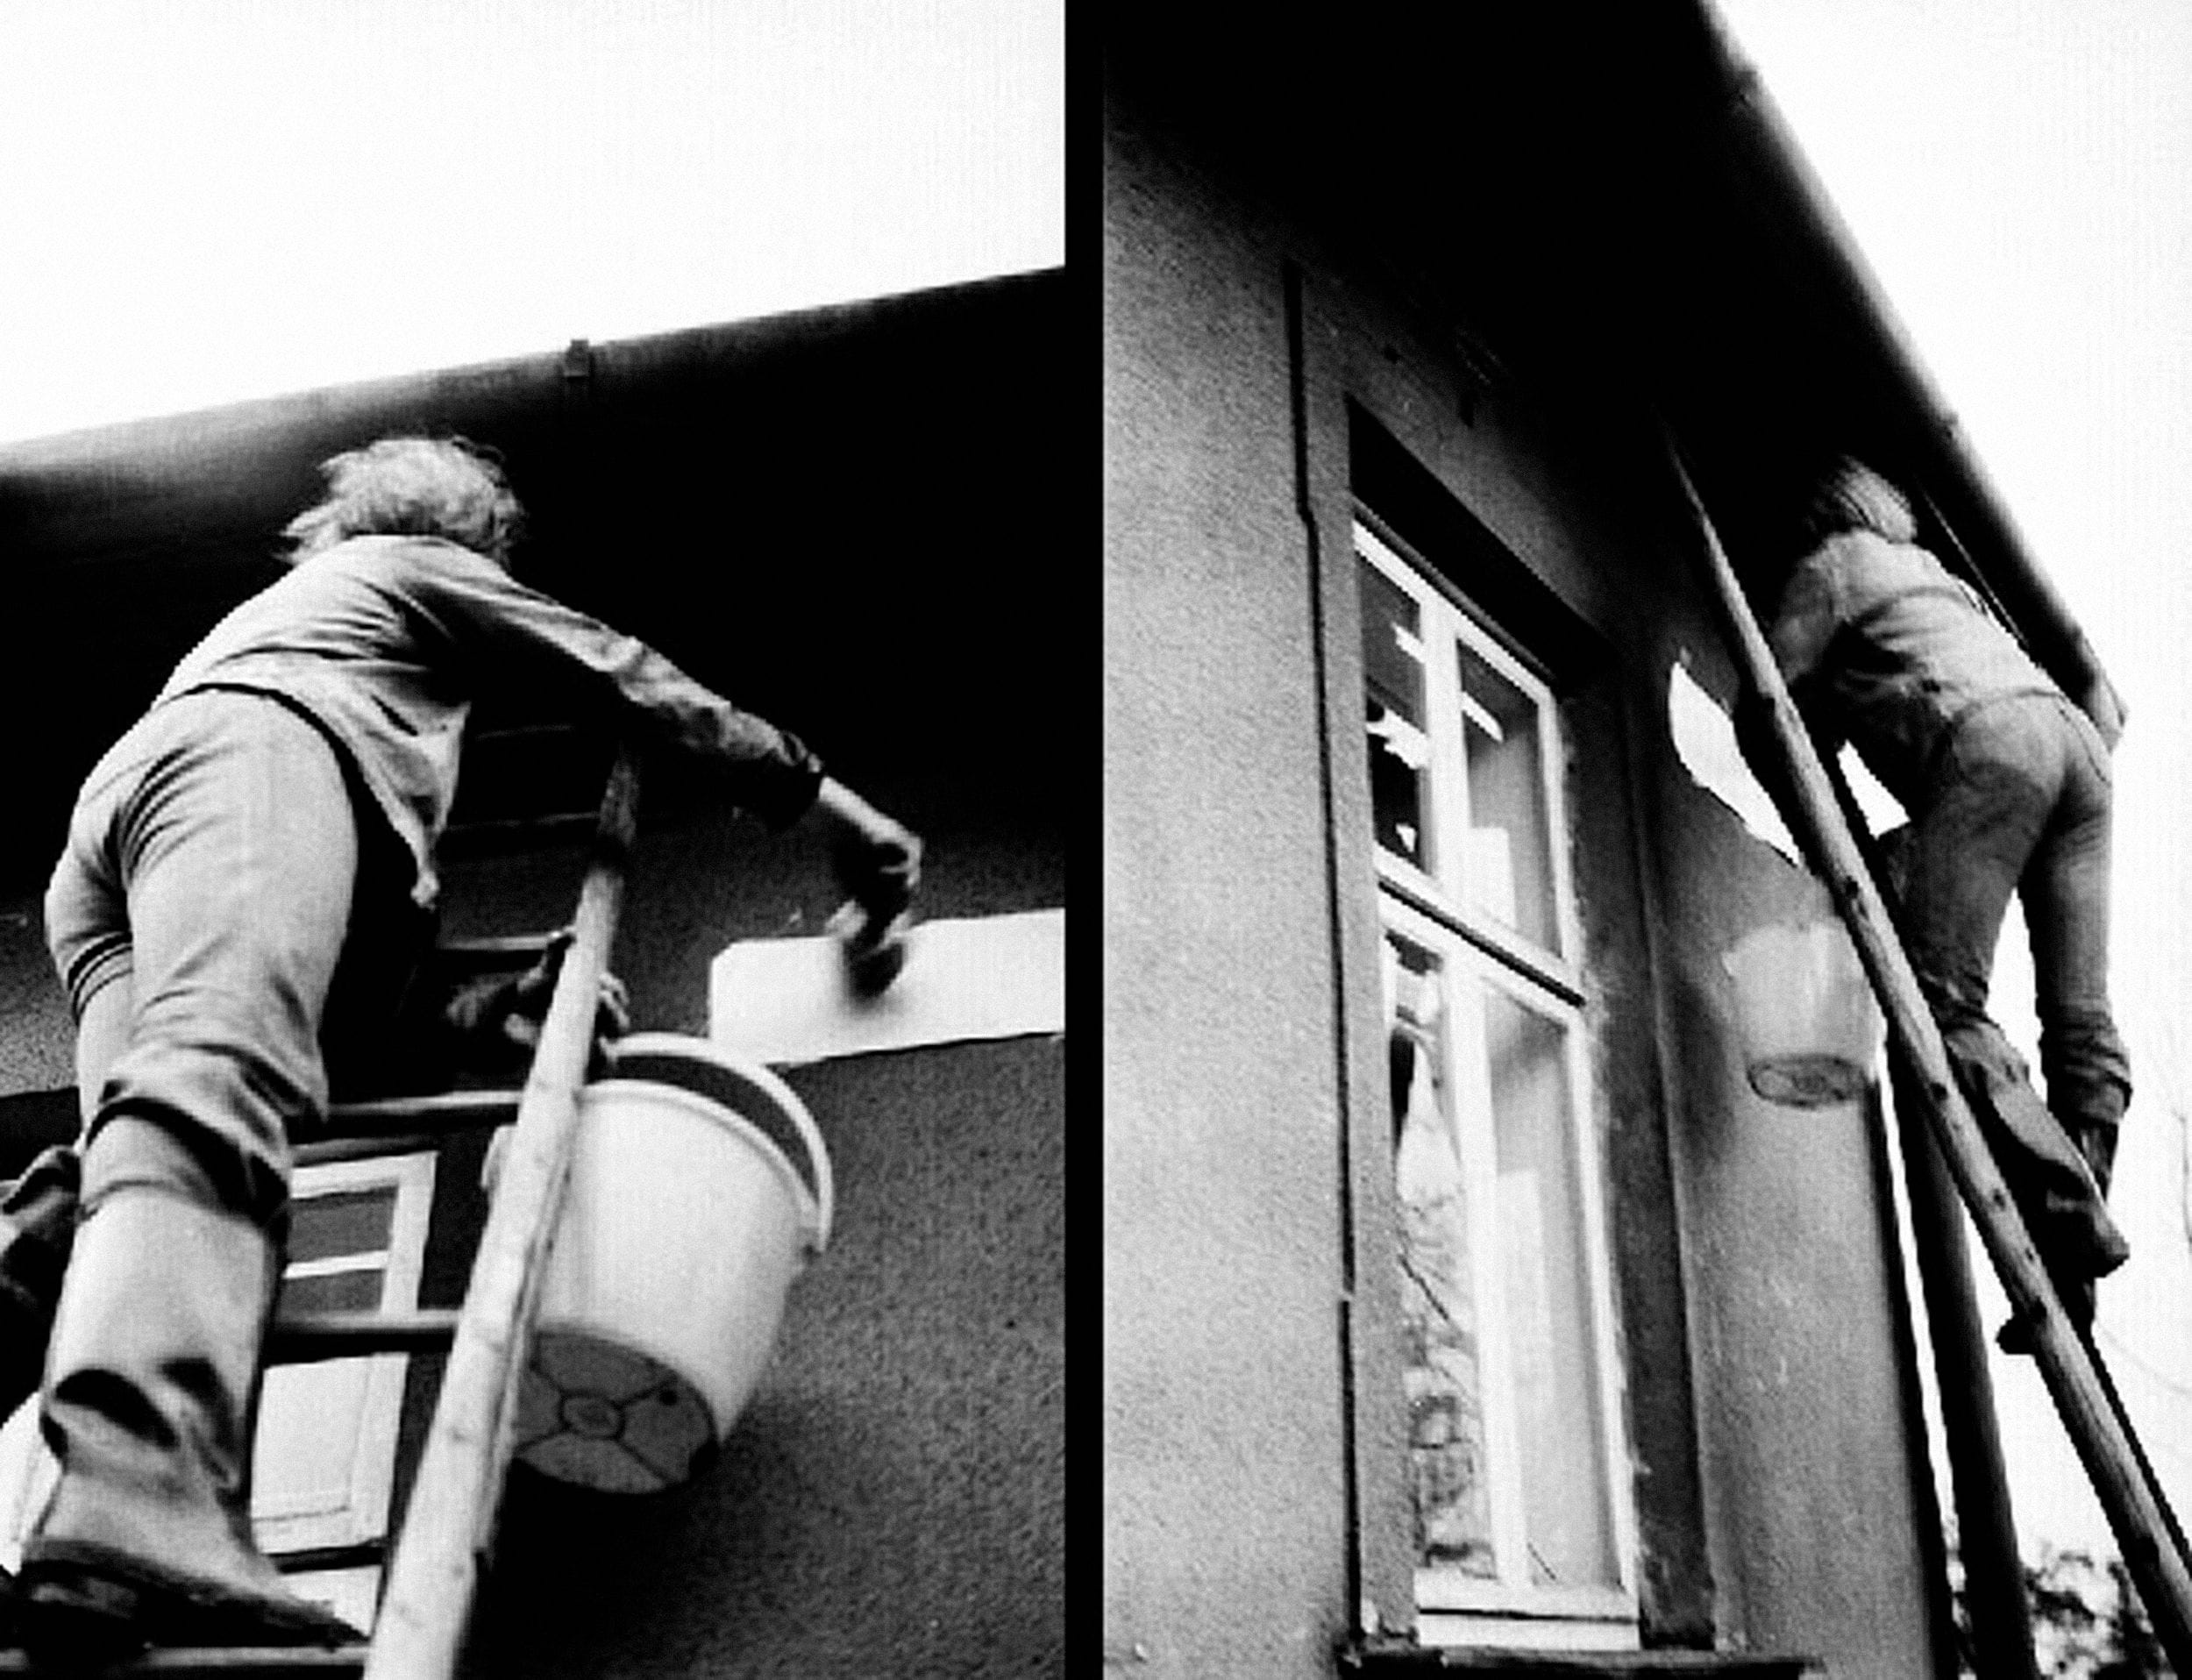 Wincenty Dunikowski-Duniko, Action: Labyrinth, Painting the plates with street names, Nowa Ruda, 1973